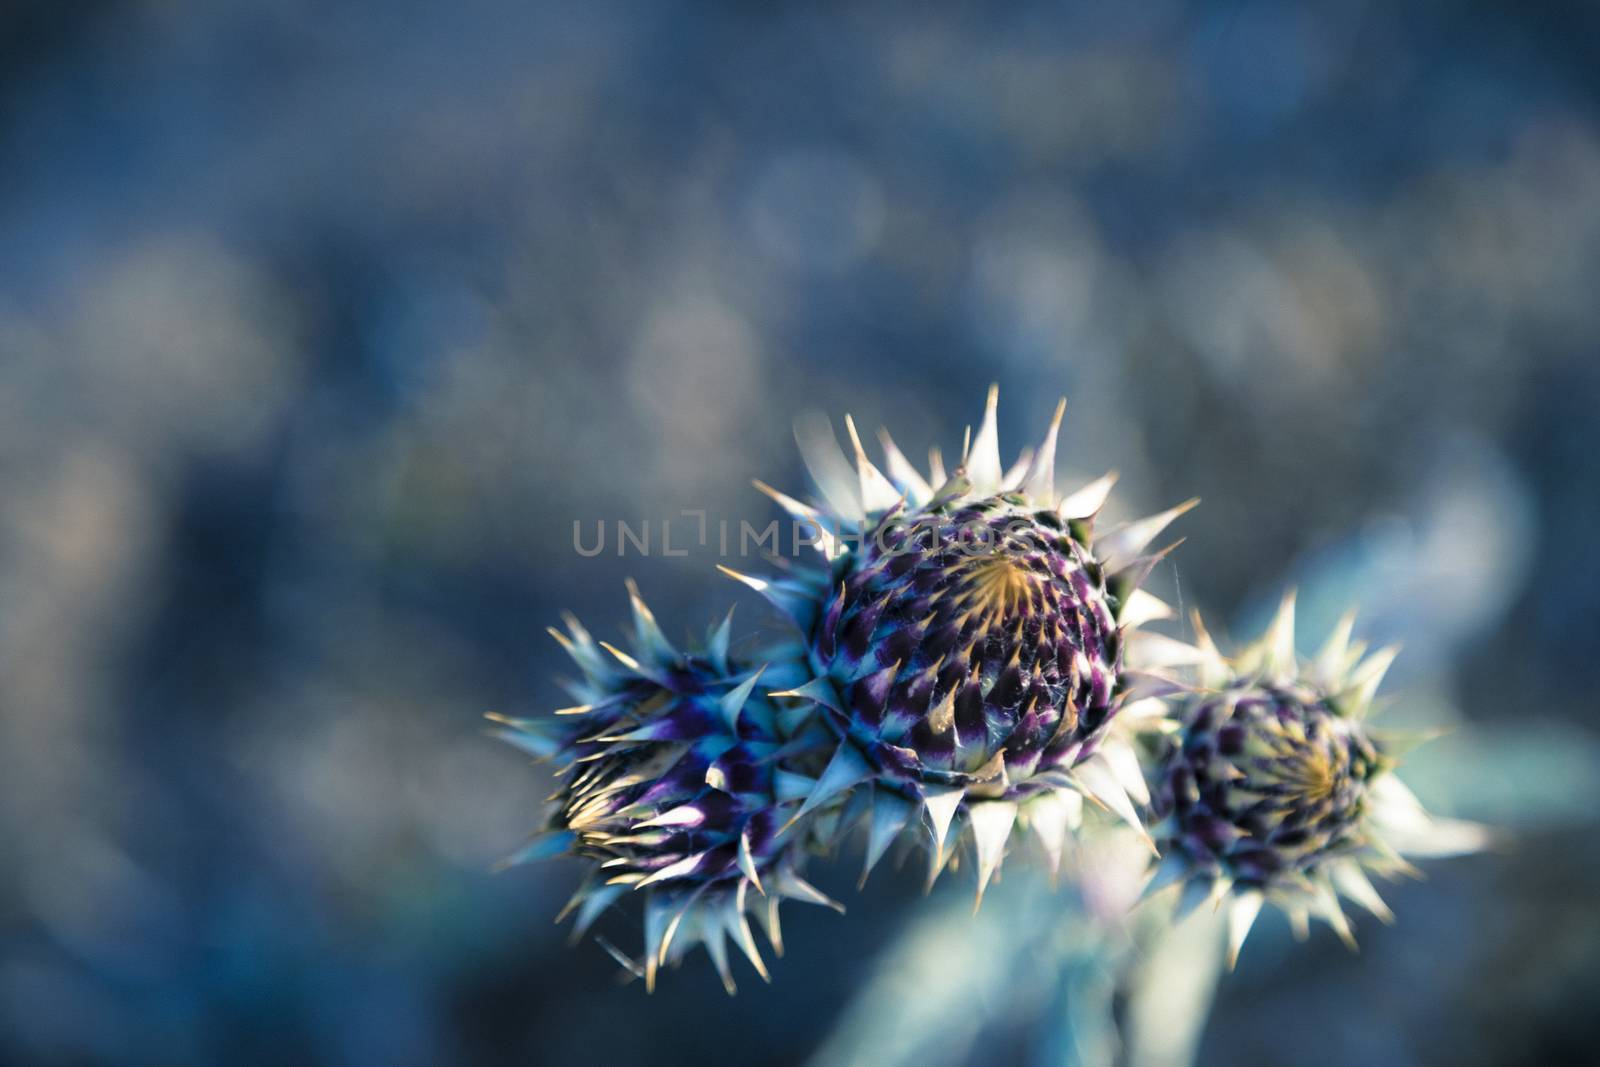 Detail of dried cardoon at front and meadow at background. Beautiful blue color added.